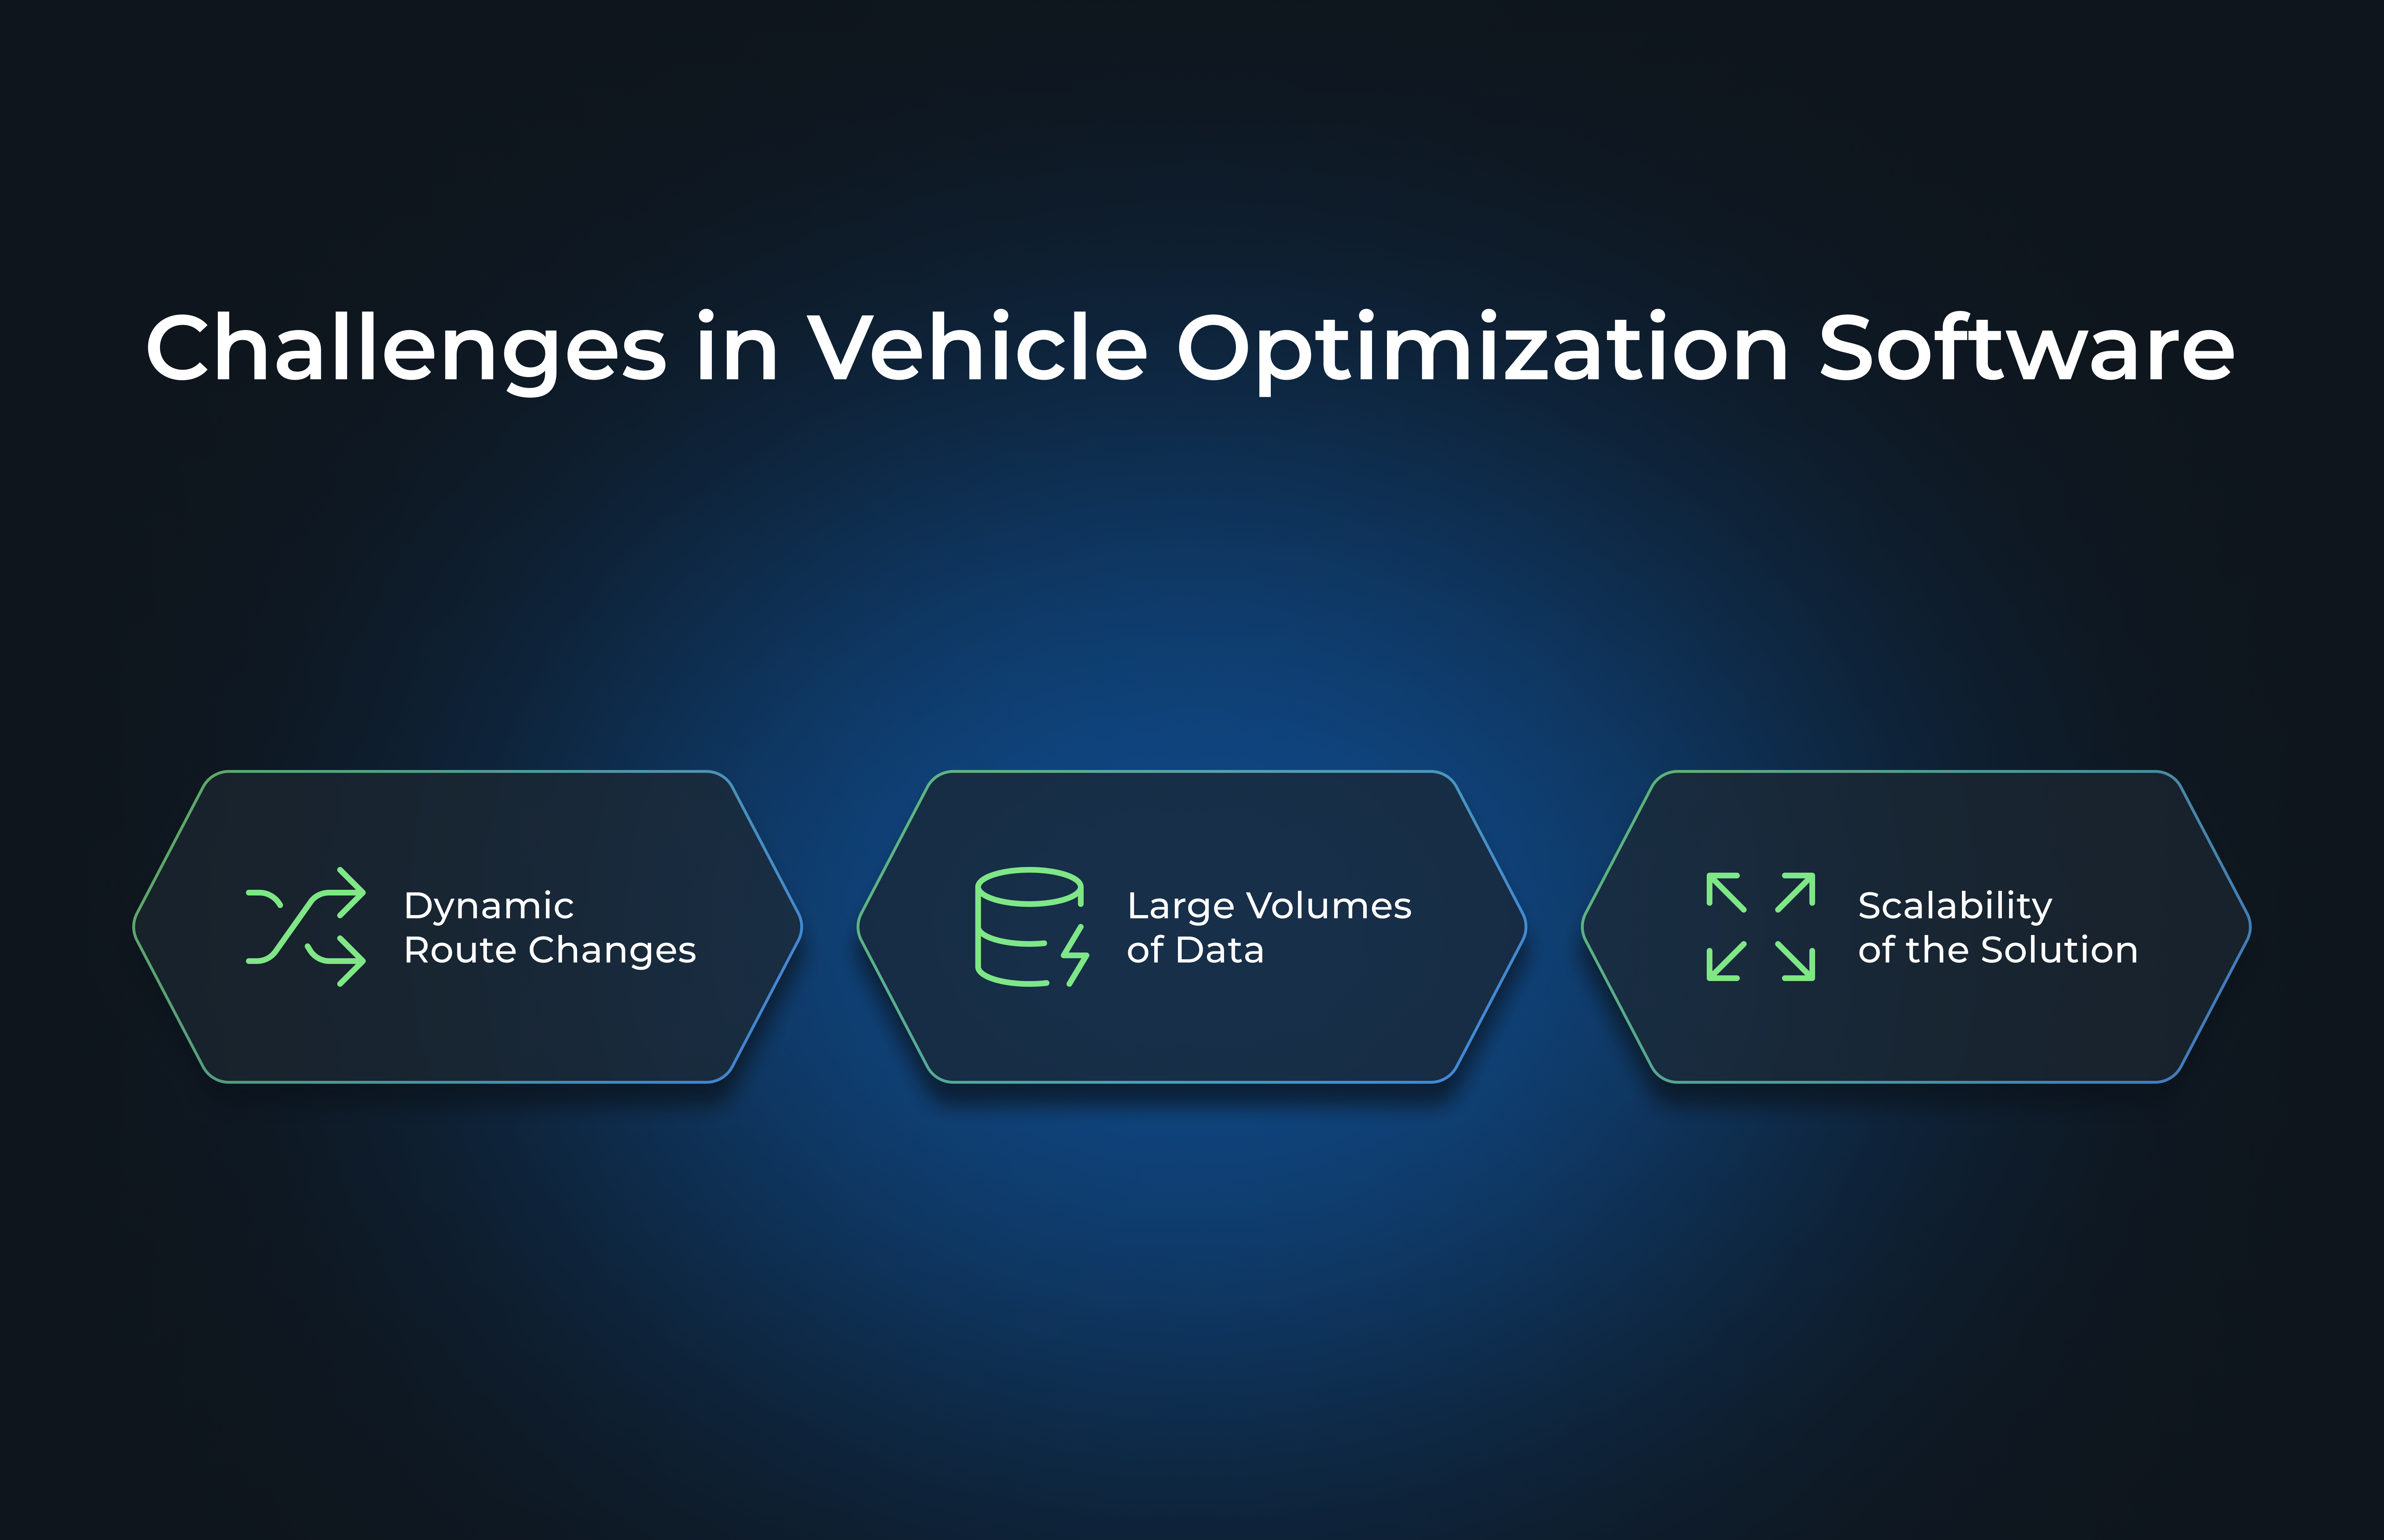 Challenges in Vehicle Optimization Software: Dynamic Route Changes, Large Volumes of Data, Scalability of the Solution

